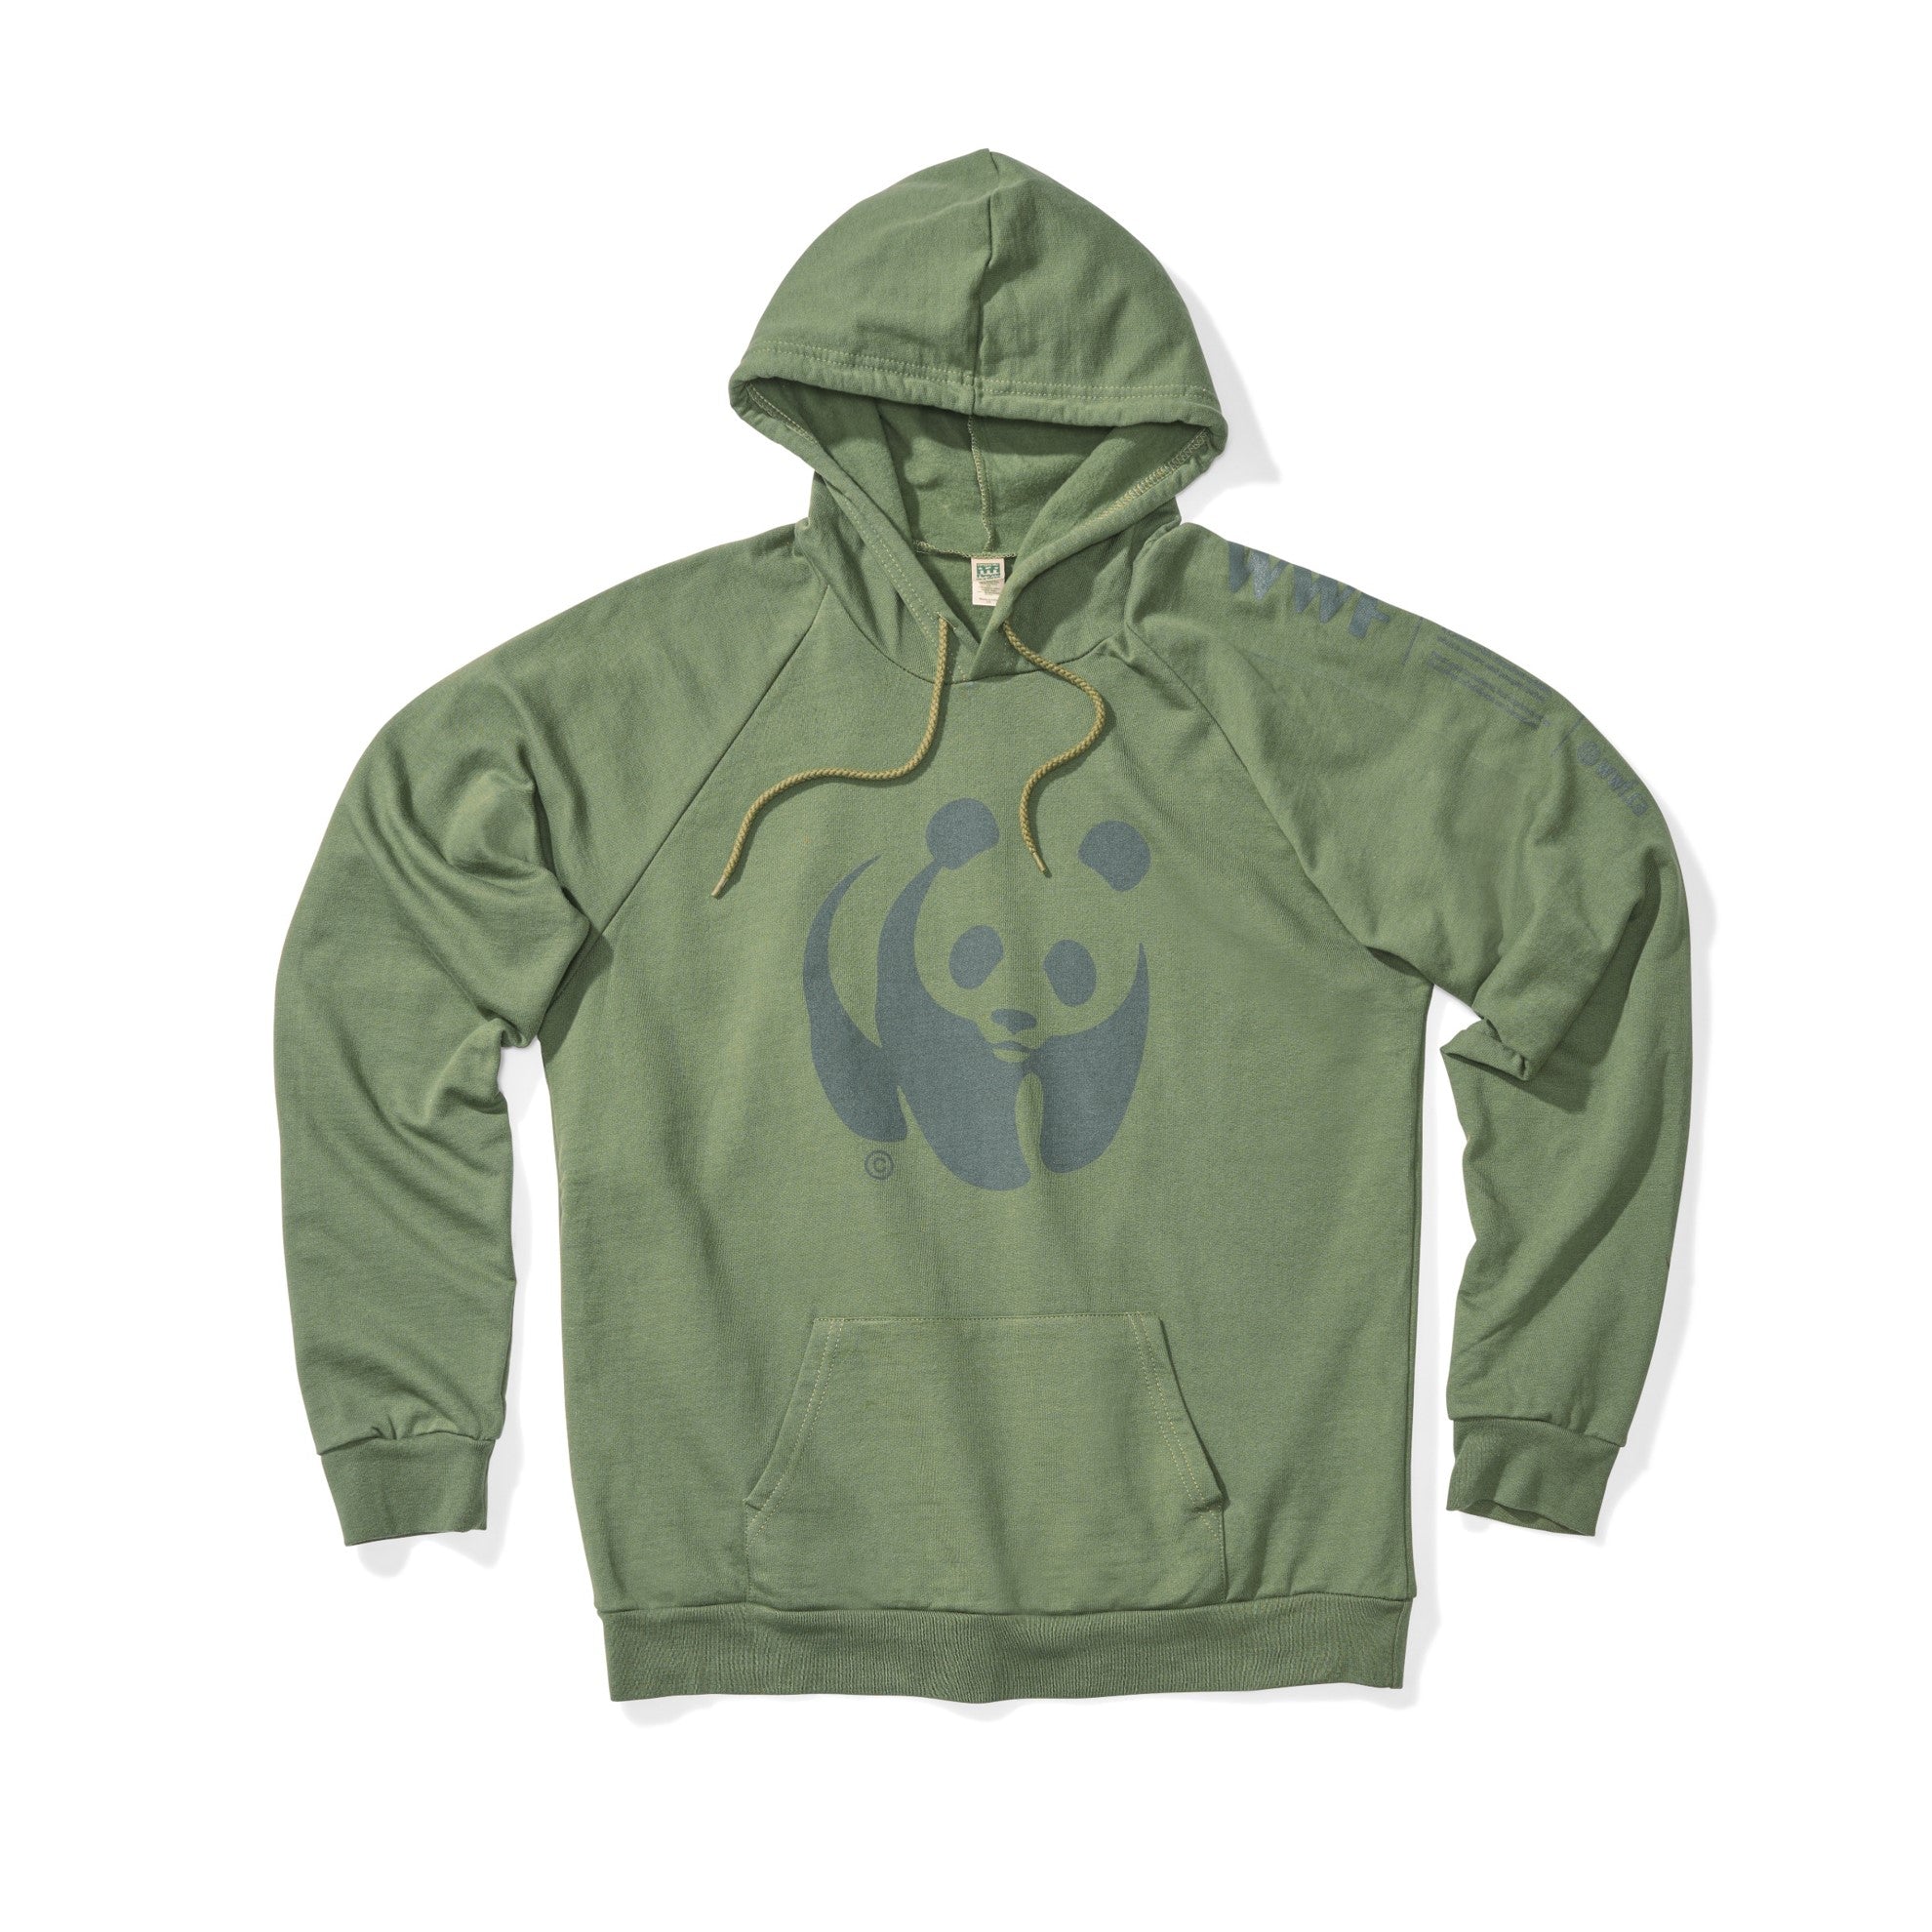 A photo of a green hoodie with the WWF panda logo on the chest